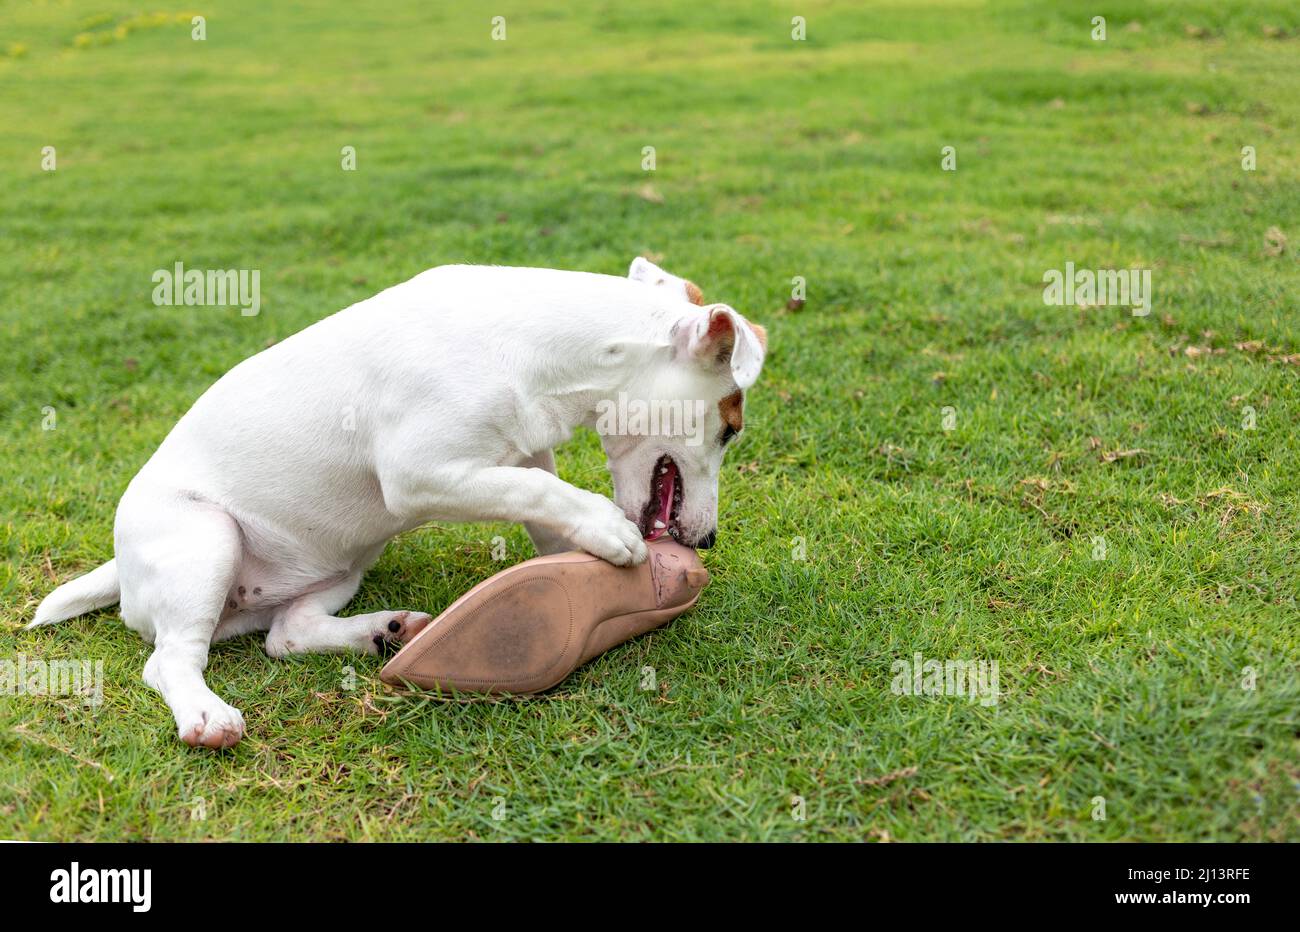 mini white Jack russel puppy dog bitting shoes on green grass background with long banner size Stock Photo